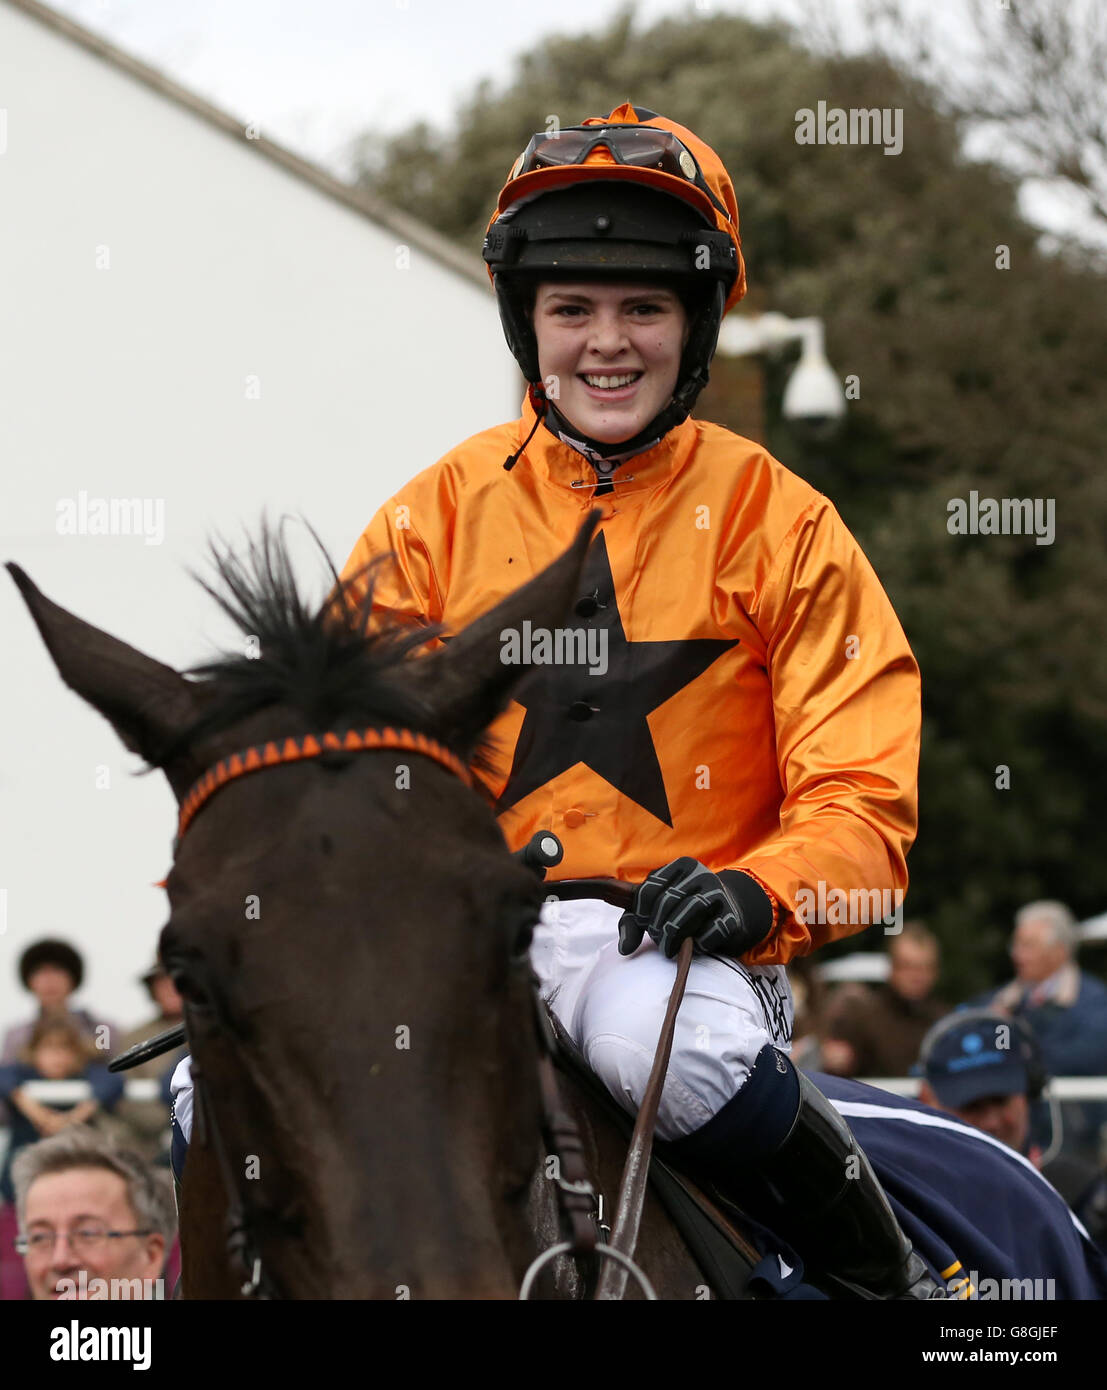 Kempton Park Races - William Hill Winter Festival - Day One. Lizzie Kelly celebrates winning The Kauto Star Novices' Chase on Tea For Two Stock Photo